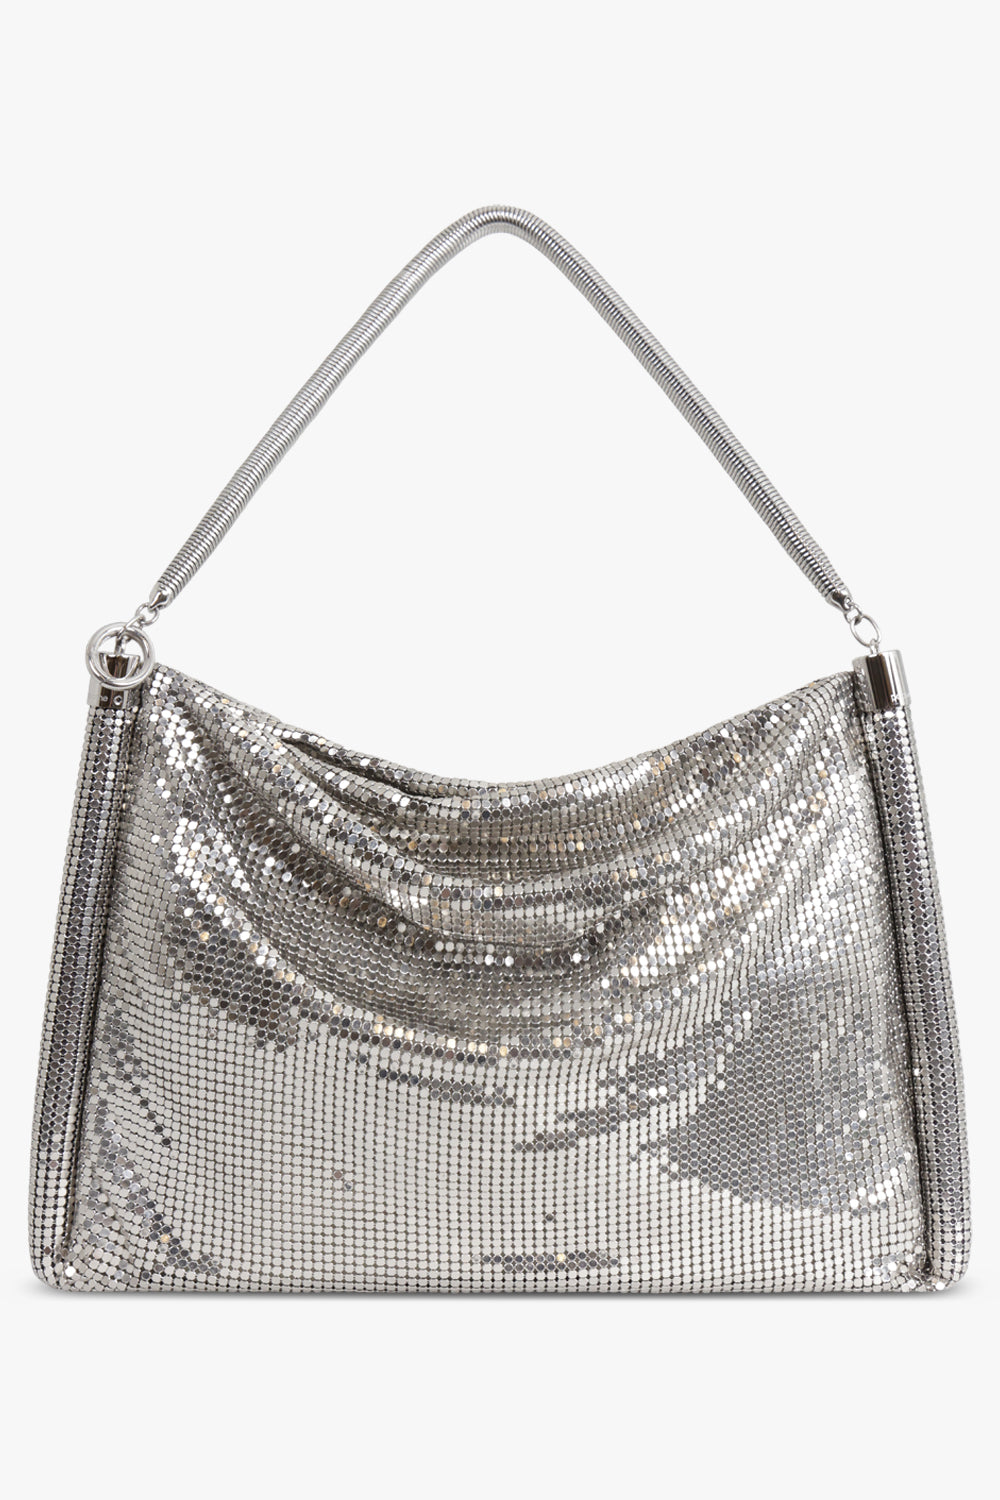 Silver Evening Bag -Gem, Bead, Embroidery, Gorgeous, Buy Now – Luxy Moon